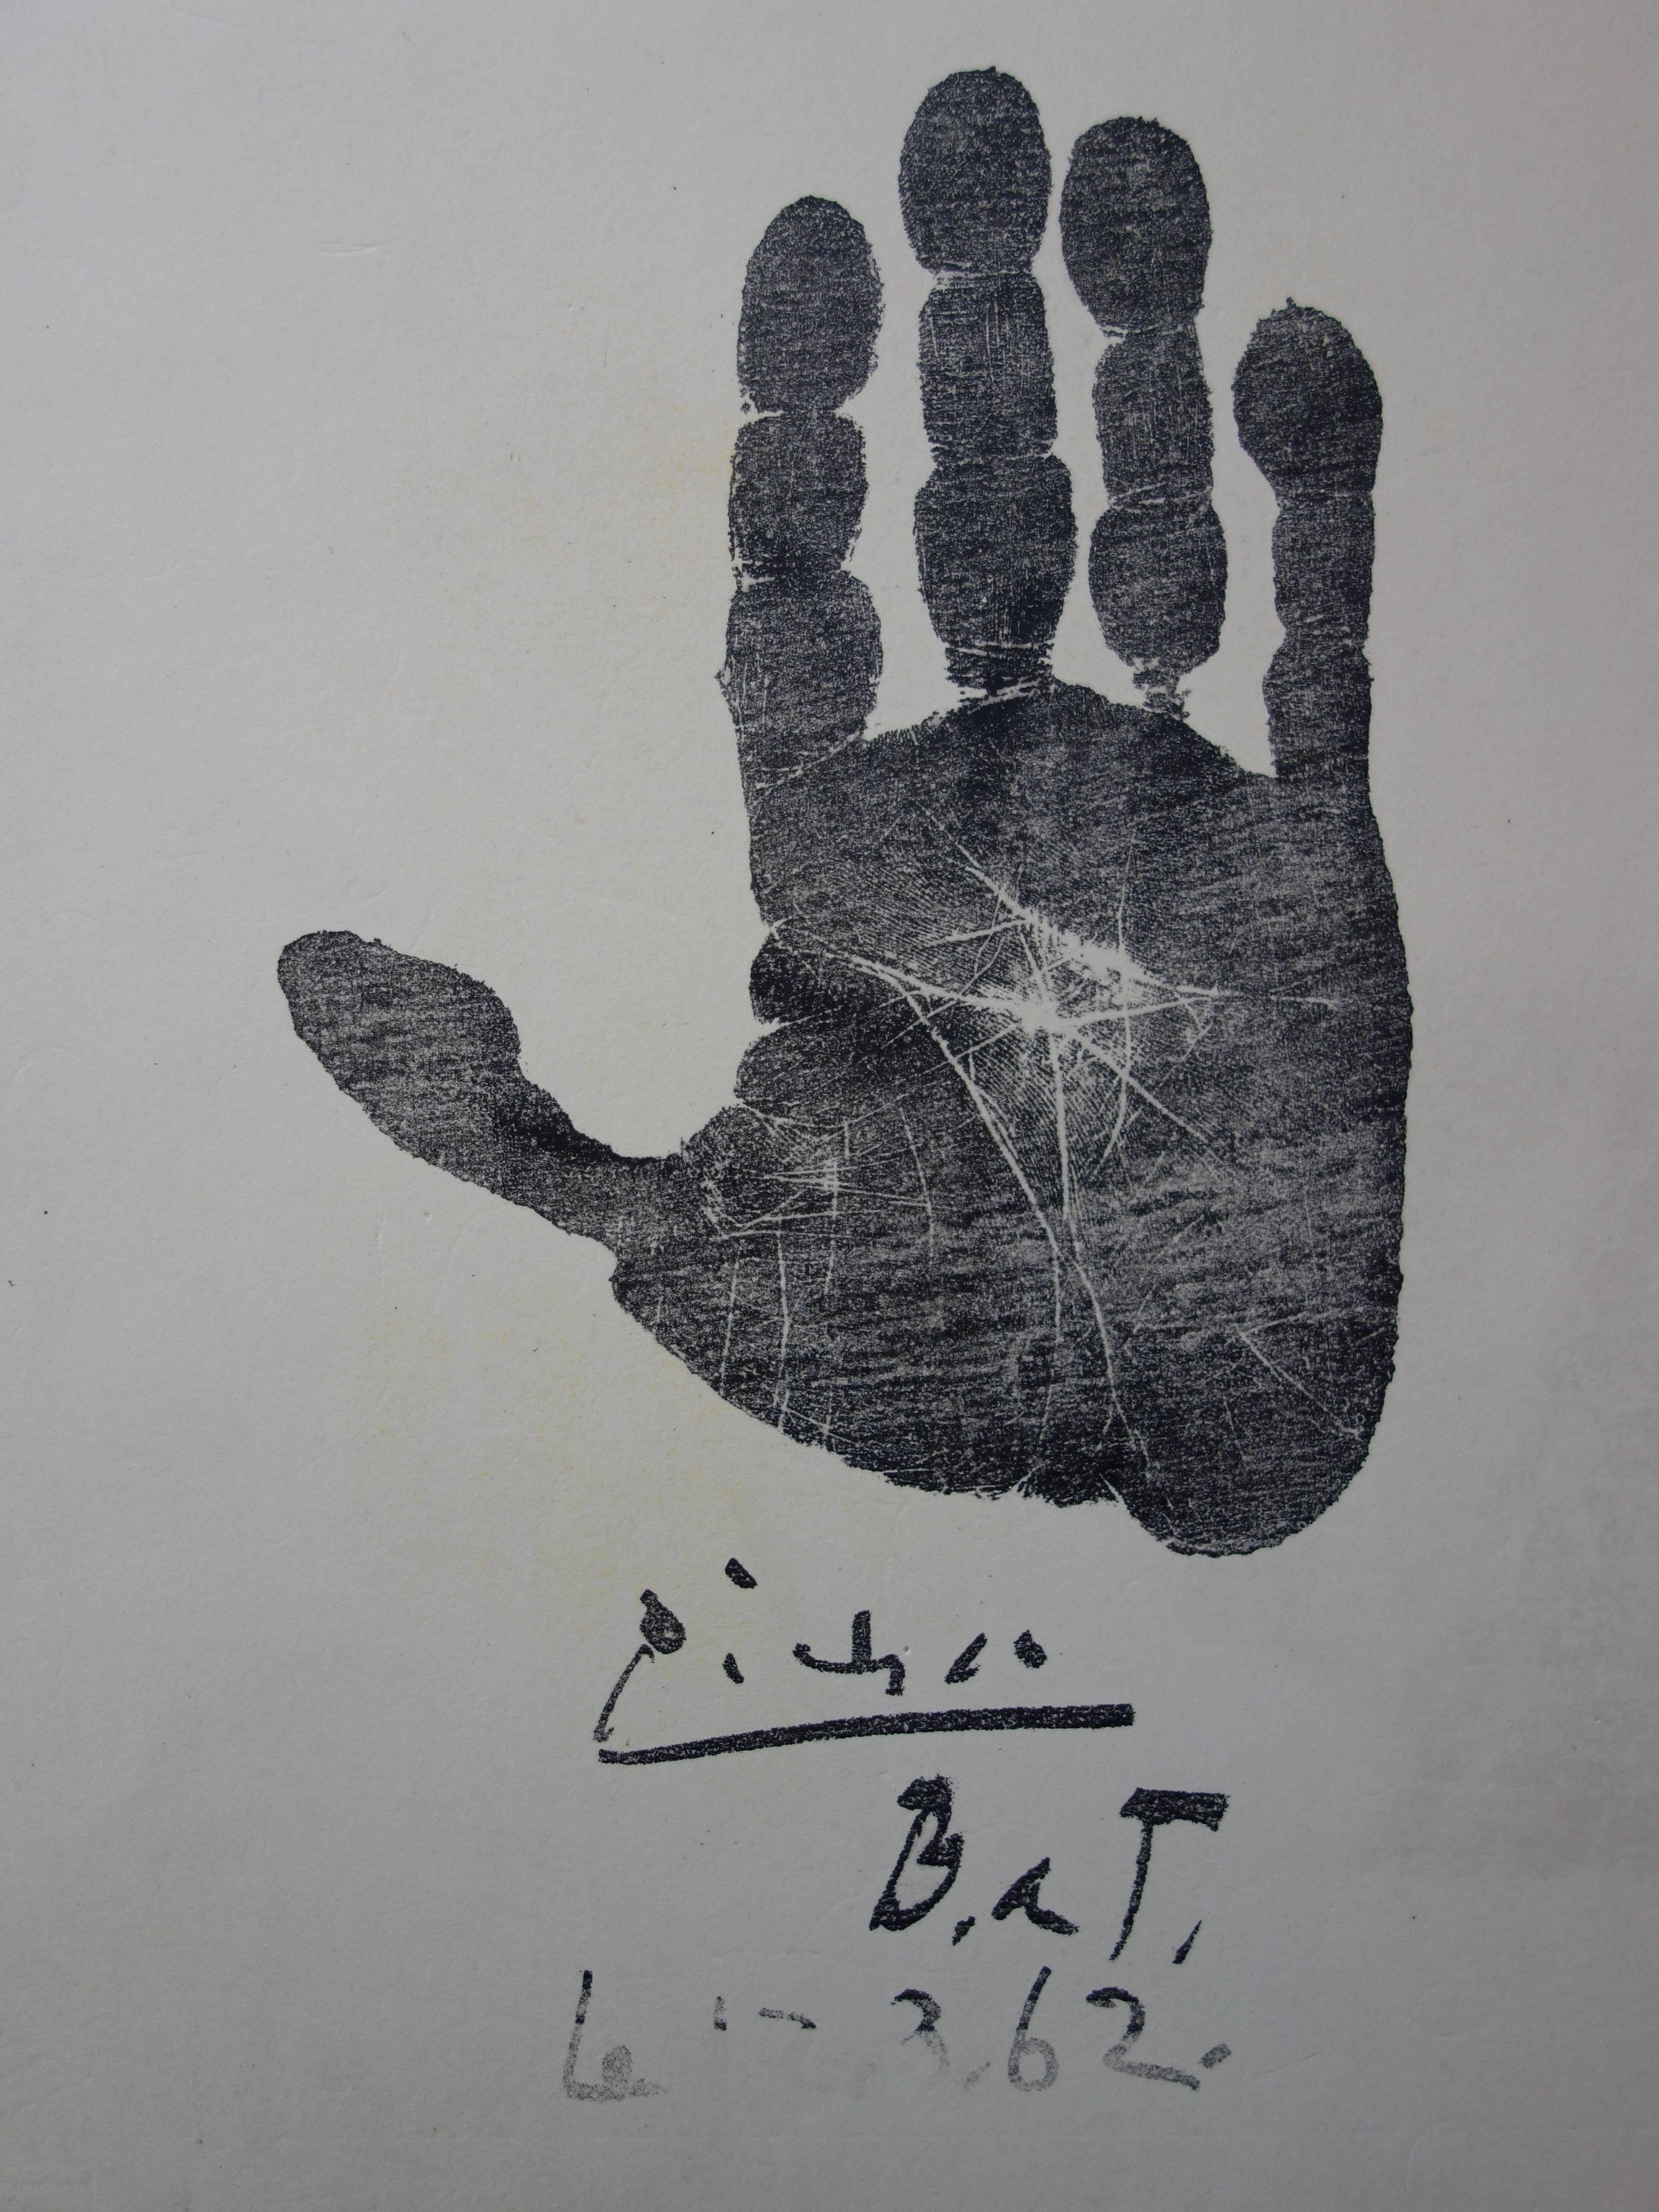 Hand of the Artist - Original lithograph - 1962 - Realist Print by Pablo Picasso